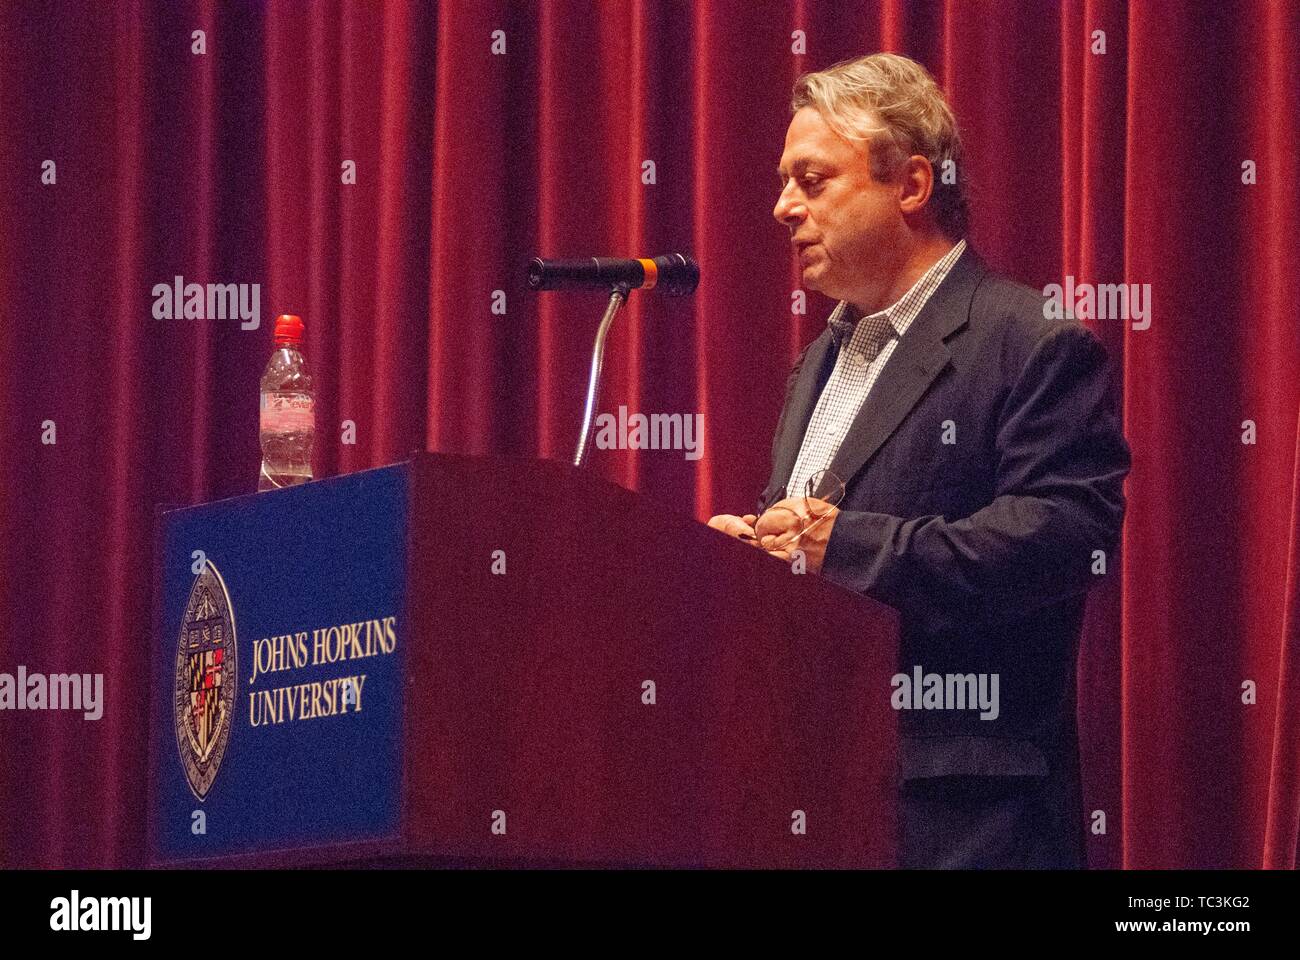 Profile shot of journalist Christopher Hitchens (1949 - 2011) speaking from a podium during a Milton S Eisenhower Symposium, Homewood Campus of Johns Hopkins University, Baltimore, Maryland, September 18, 2007. From the Homewood Photography Collection. () Stock Photo